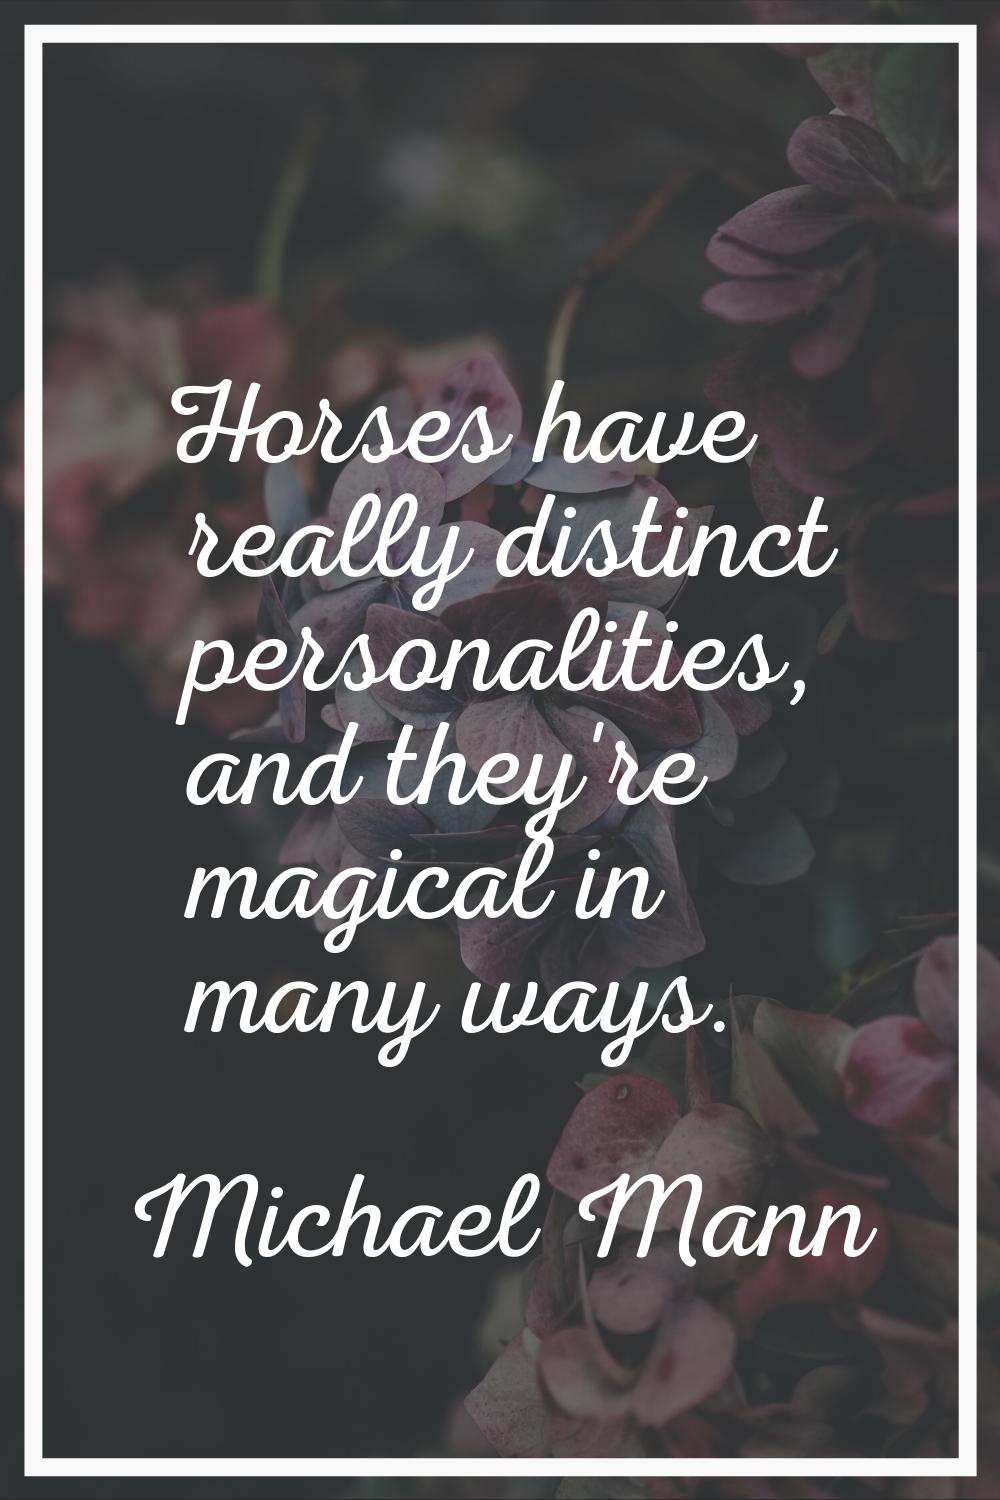 Horses have really distinct personalities, and they're magical in many ways.